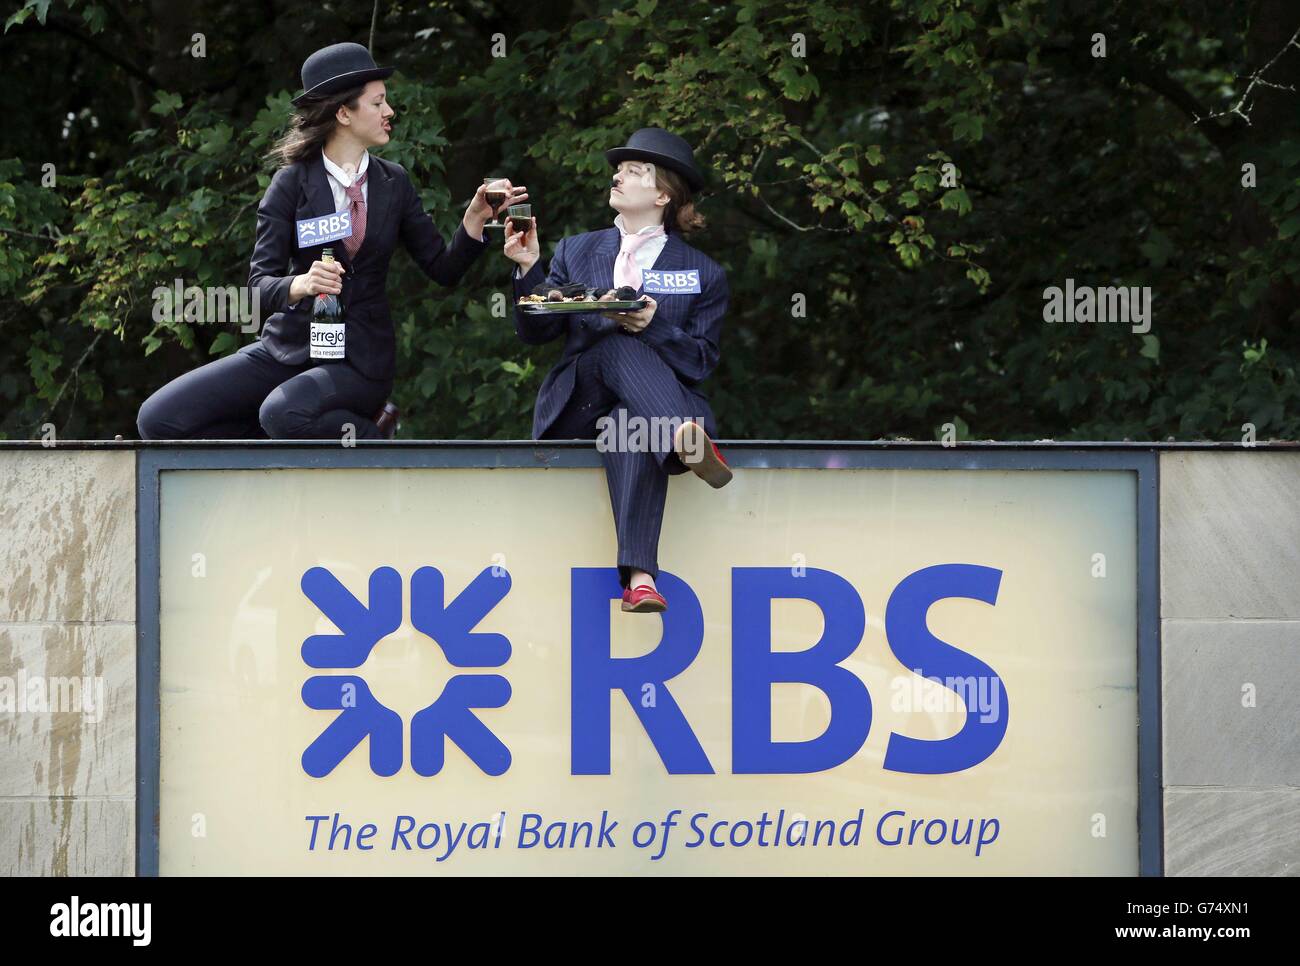 Protesters outside the RBS (Royal Bank of Scotland) annual general meeting in Gogarburn, Scotland, as The World Development Movement call on the bank to stop investing in coal mining. Stock Photo